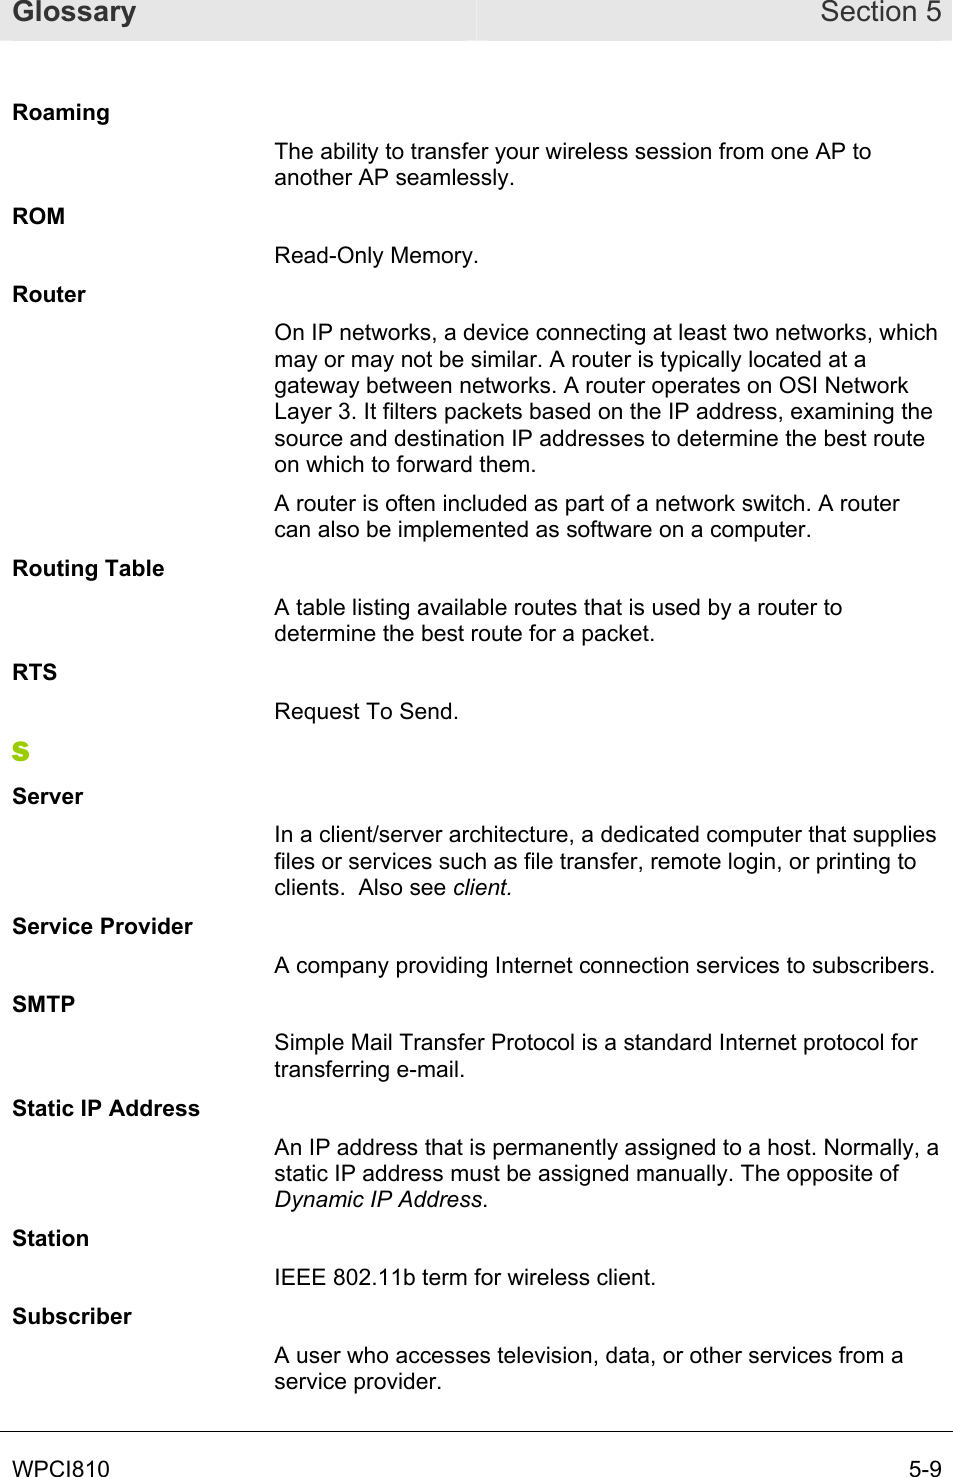 Glossary Section 5 WPCI810       5-9 Roaming The ability to transfer your wireless session from one AP to another AP seamlessly. ROM Read-Only Memory. Router On IP networks, a device connecting at least two networks, which may or may not be similar. A router is typically located at a gateway between networks. A router operates on OSI Network Layer 3. It filters packets based on the IP address, examining the source and destination IP addresses to determine the best route on which to forward them.  A router is often included as part of a network switch. A router can also be implemented as software on a computer. Routing Table A table listing available routes that is used by a router to determine the best route for a packet. RTS Request To Send. S Server In a client/server architecture, a dedicated computer that supplies files or services such as file transfer, remote login, or printing to clients.  Also see client. Service Provider A company providing Internet connection services to subscribers. SMTP Simple Mail Transfer Protocol is a standard Internet protocol for transferring e-mail. Static IP Address An IP address that is permanently assigned to a host. Normally, a static IP address must be assigned manually. The opposite of Dynamic IP Address. Station IEEE 802.11b term for wireless client. Subscriber A user who accesses television, data, or other services from a service provider. 